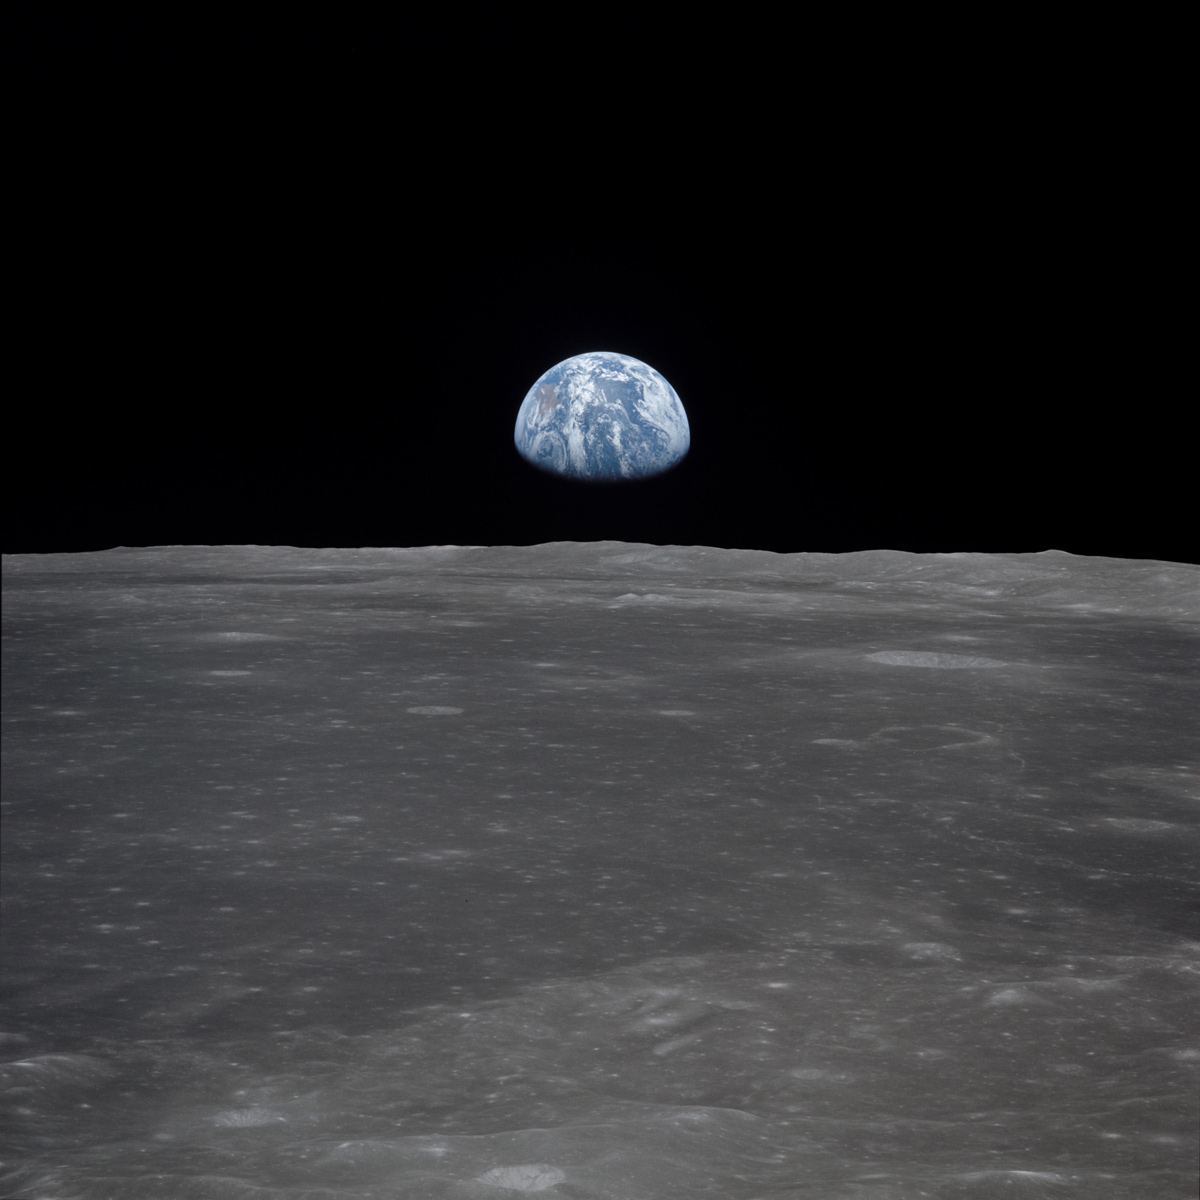 planet earth from the moon